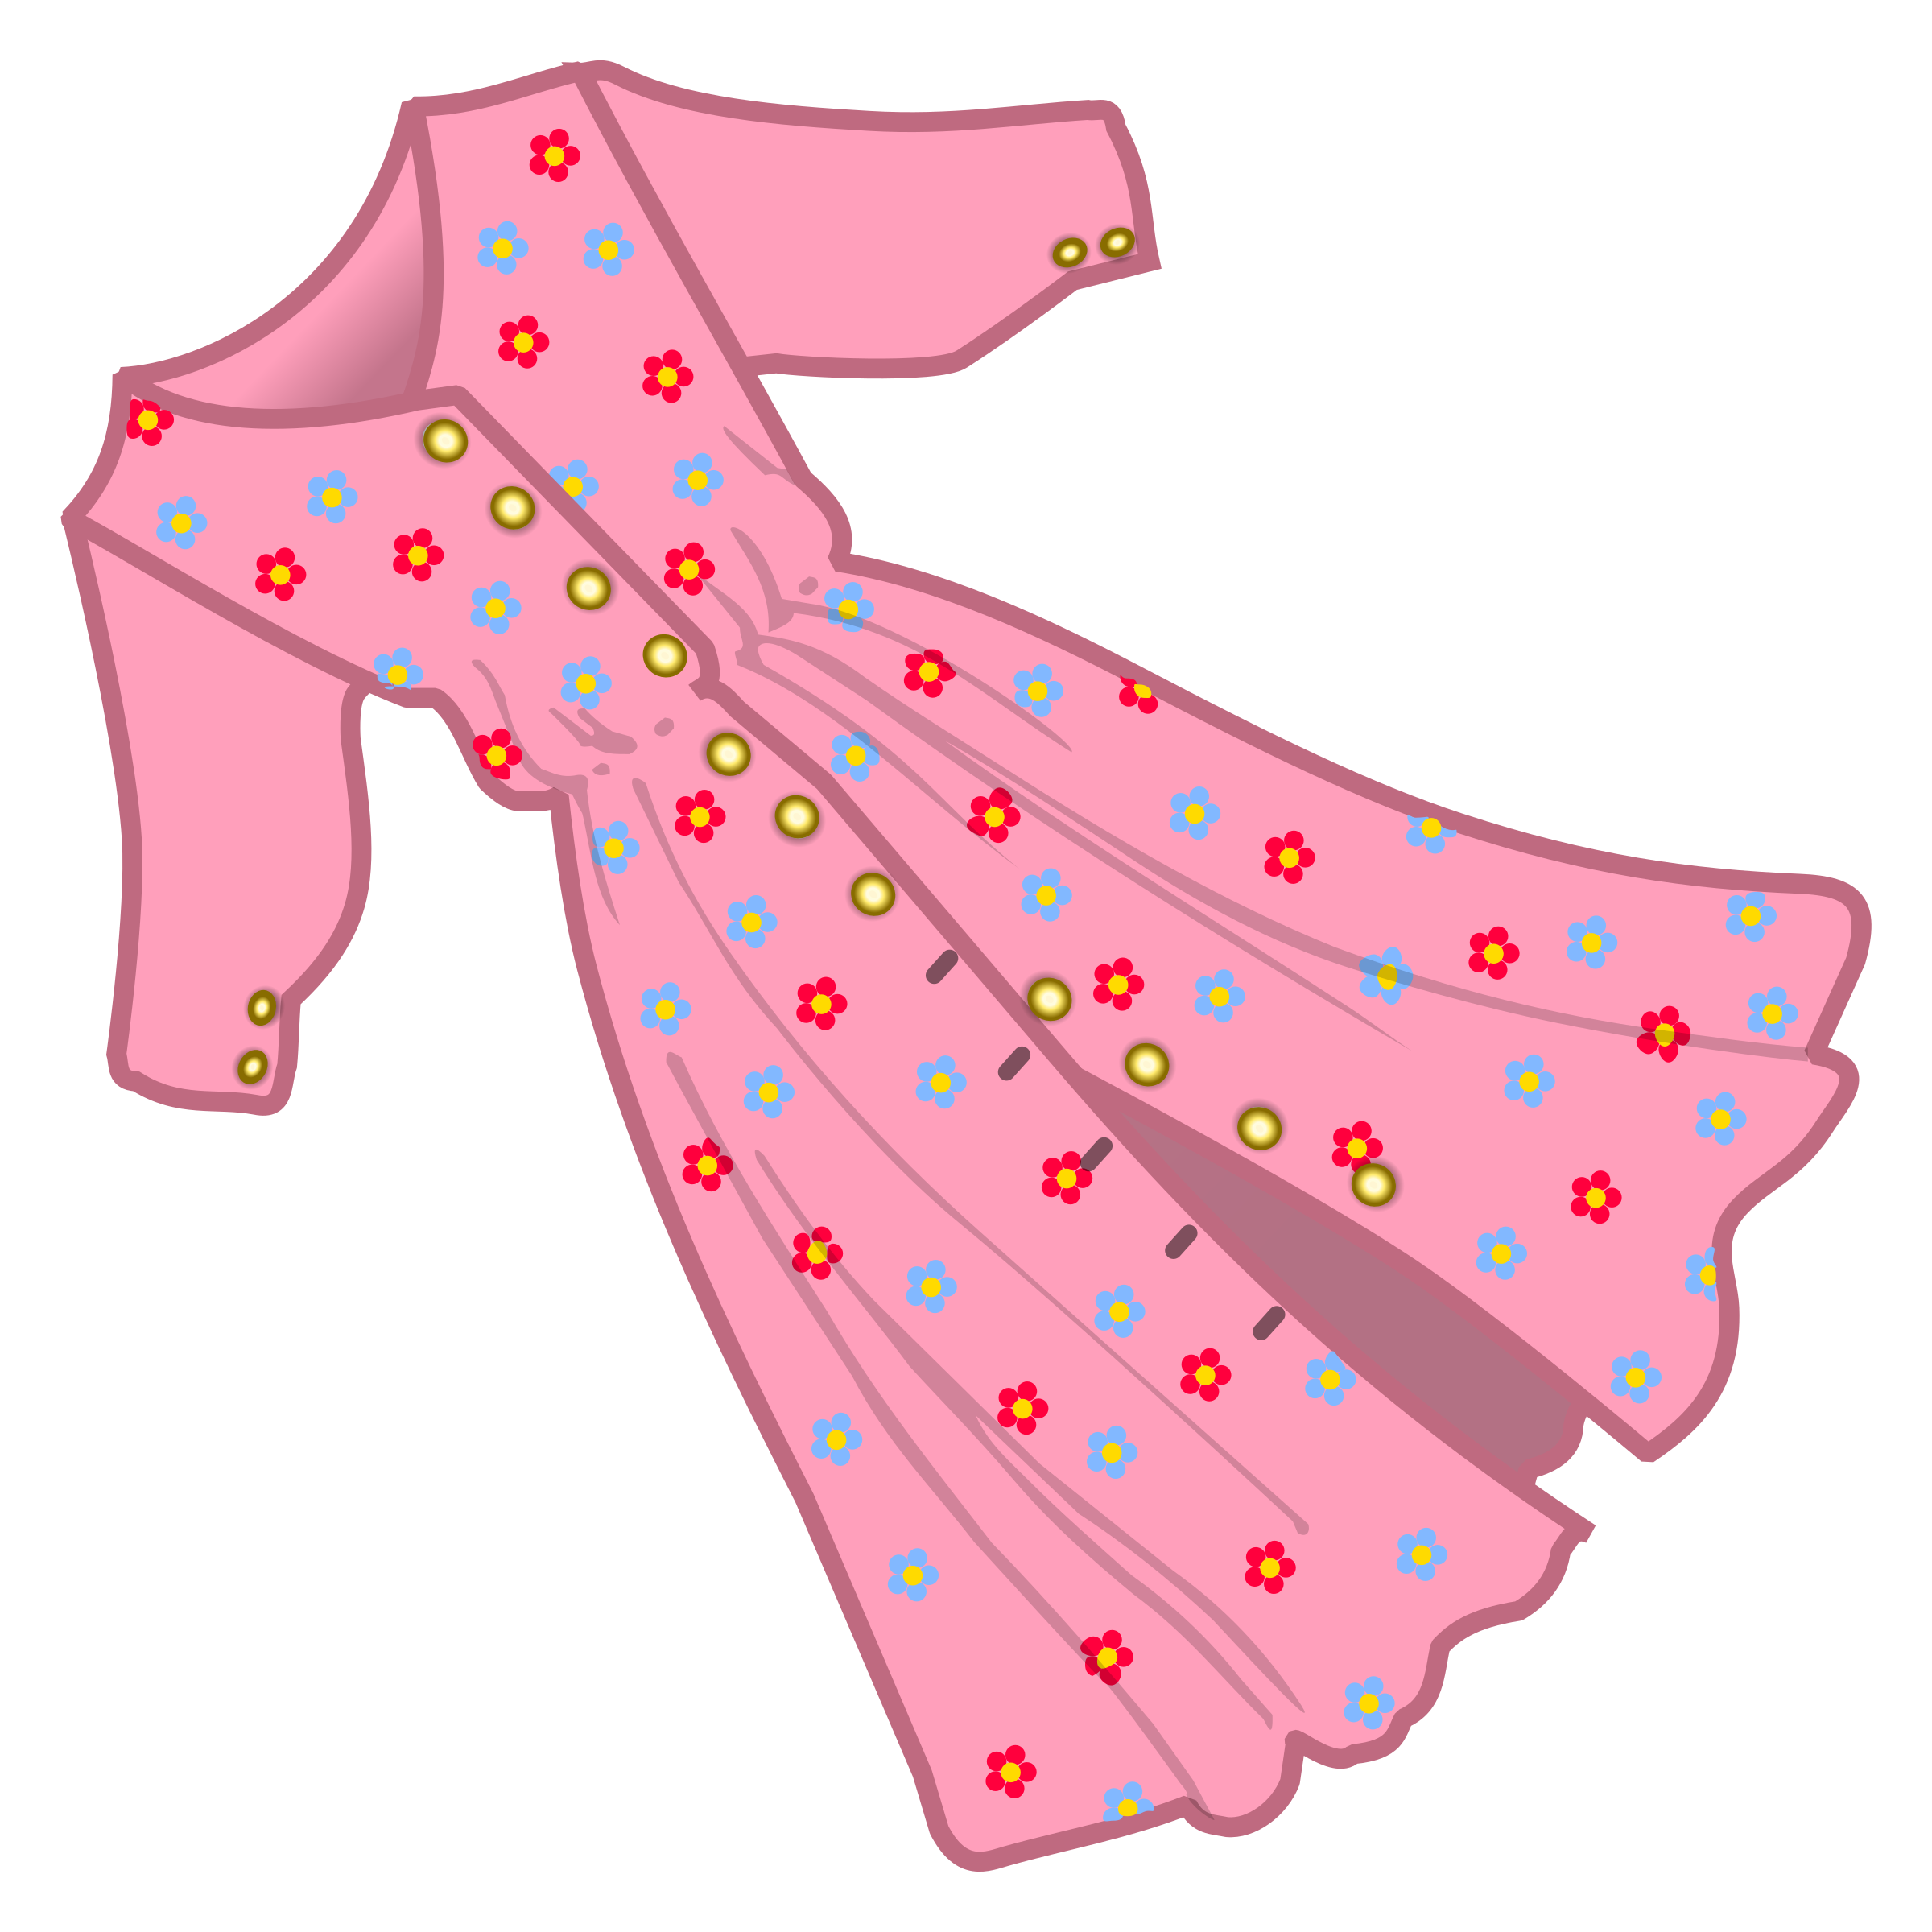 dress clipart png - Clip Art Library